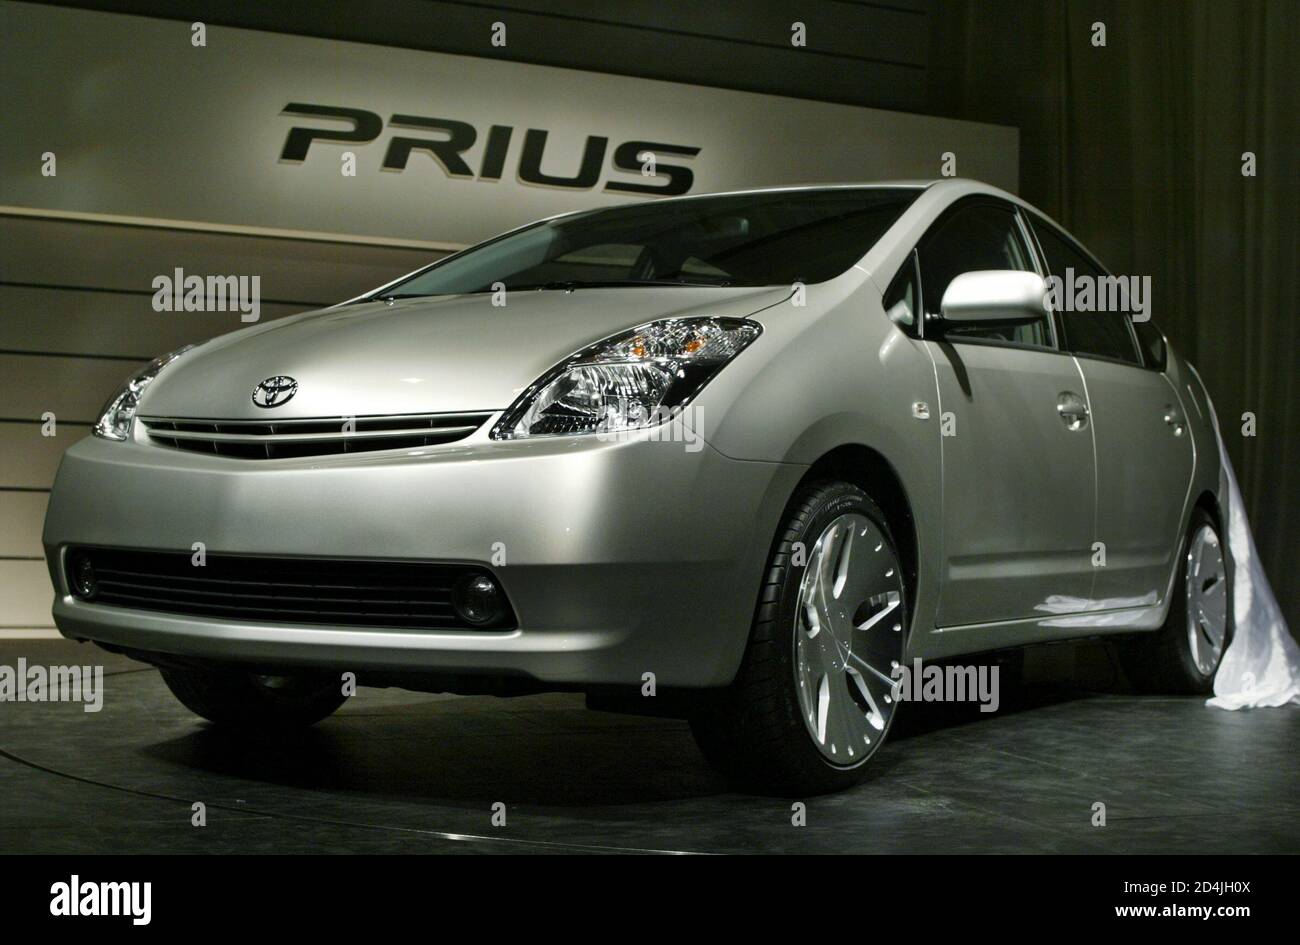 2 PIC:TOK60D  Toyota Motor Corp. unveils its all-new 'Prius' in Tokyo April 17, 2003. The new Prius is equipped with Toyota's new hybrid system THS II that allows either gas or electric modes as well as a mode in which both the gas engine and the electric motor are in operation. REUTERS/Issei Kato Stock Photo